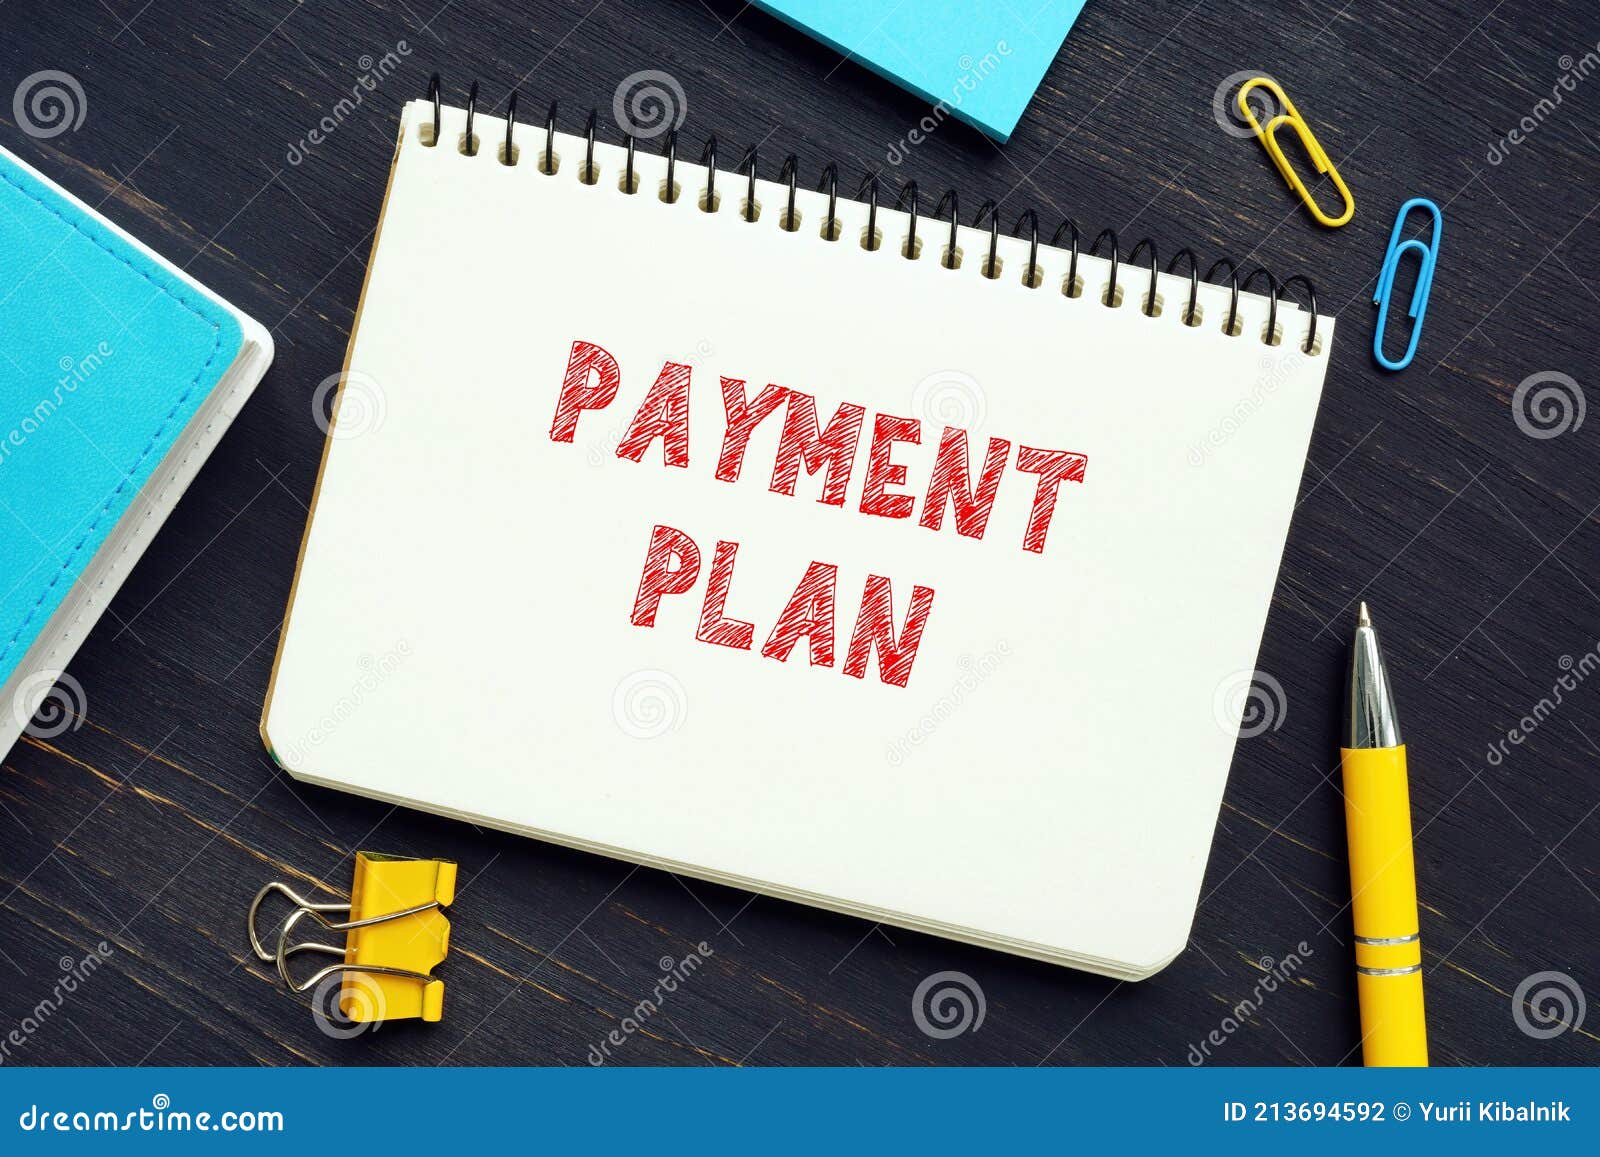 payment plan sign on the sheet. aÃÂ termÃÂ payment planÃÂ involves receiving equal monthlyÃÂ paymentsÃÂ over a set period of time